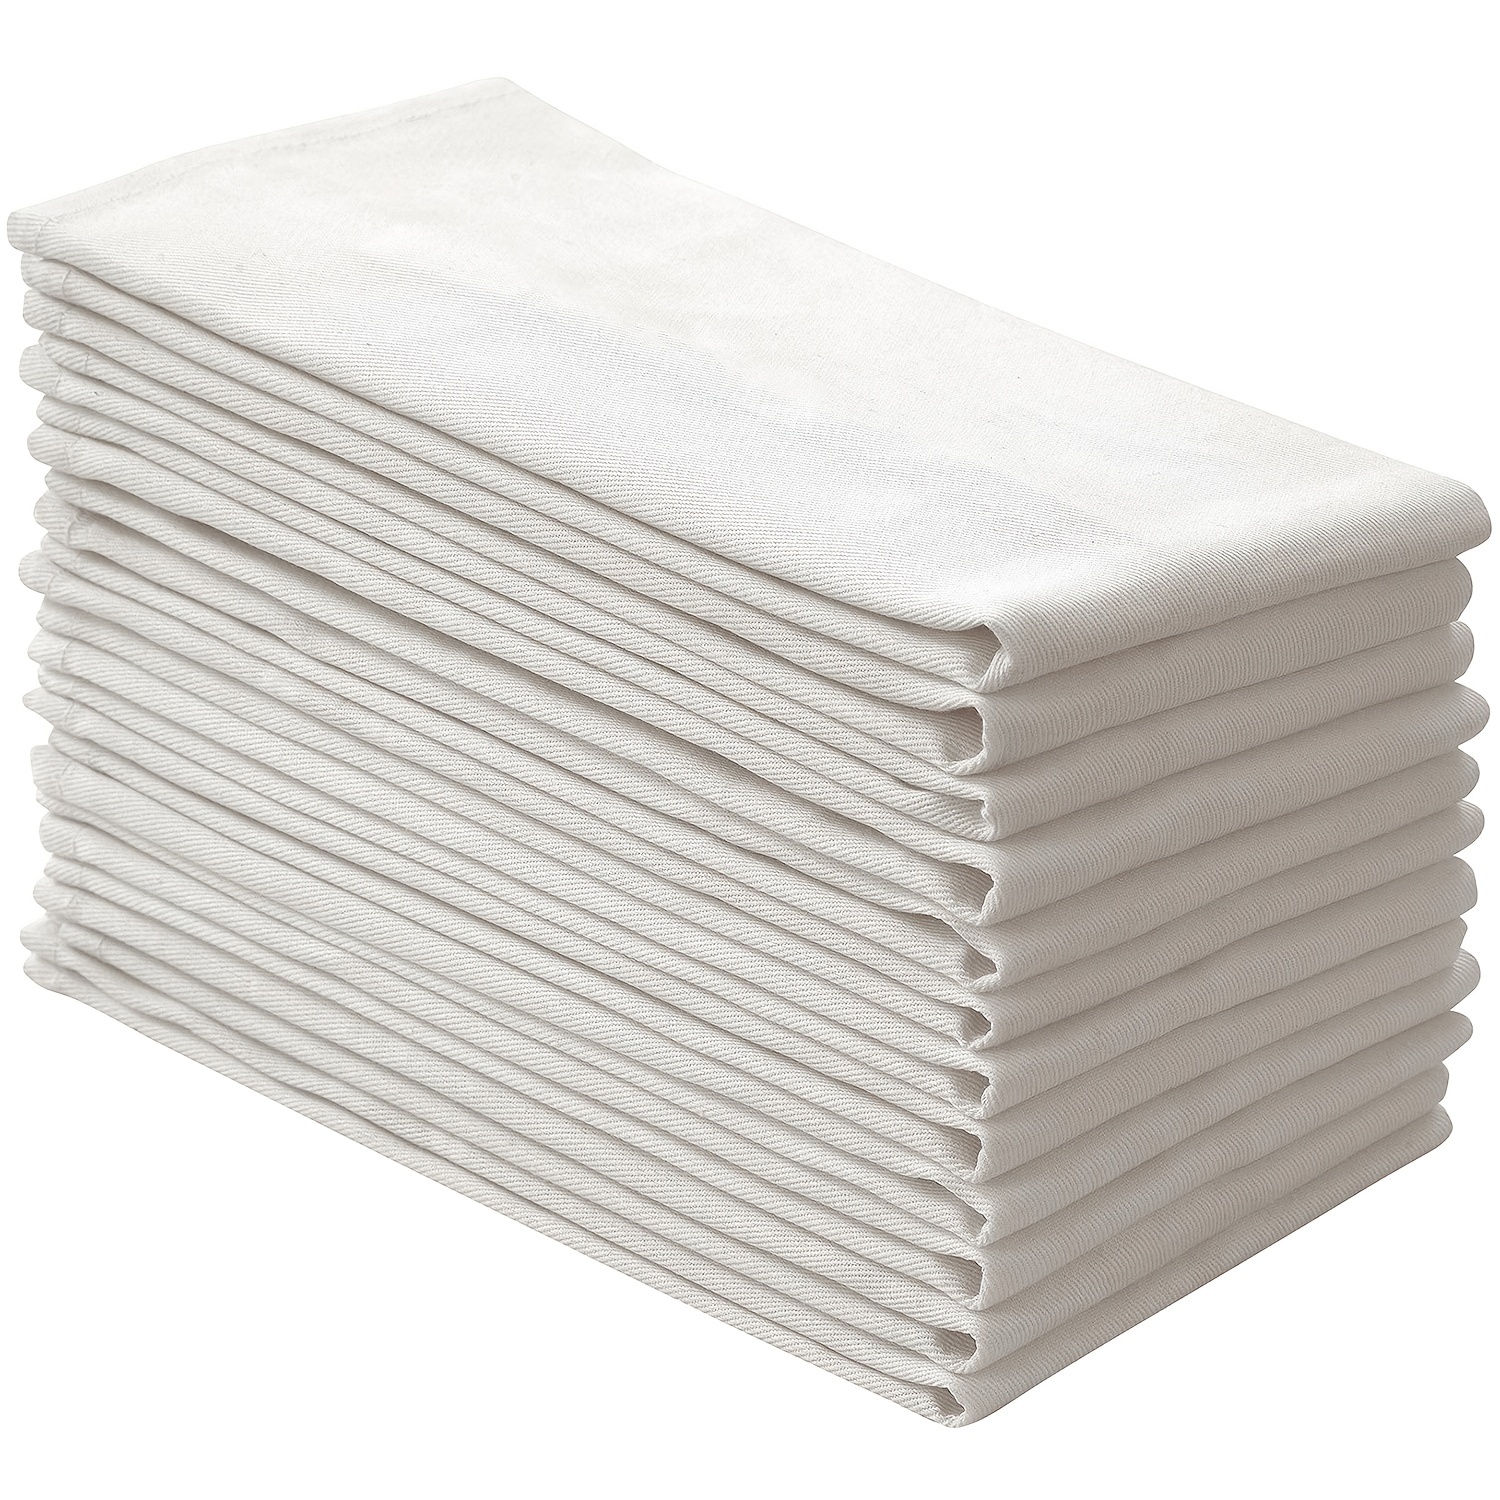 1pc White Napkin Cotton Blend Durable Cleaning Rag Hand Towels 18 18 In